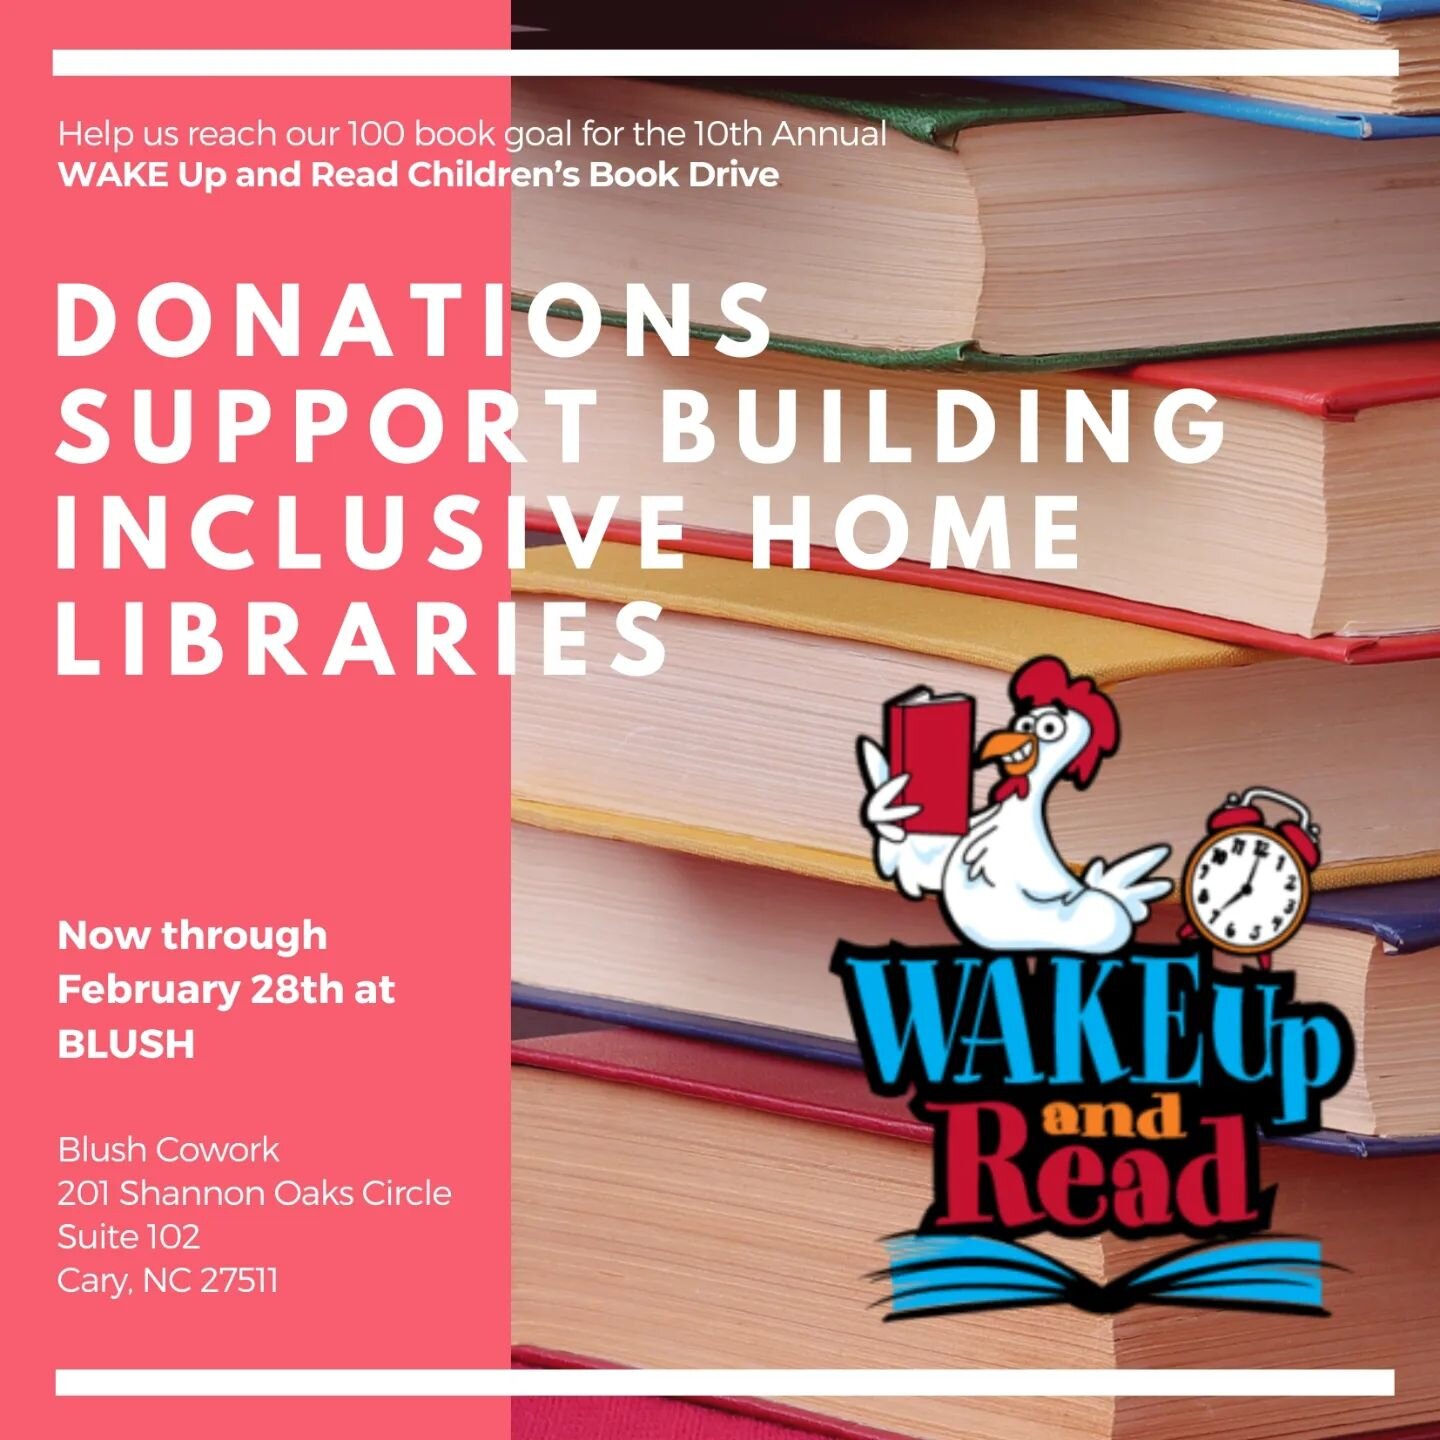 Yet another reason to visit Blush Cowork: We&rsquo;re an official collection site for the 10th Annual WAKE Up and Read Children&rsquo;s Book Drive! 

Are you clearing clutter or just feeling charitable? Bring your new and gently-used children's books